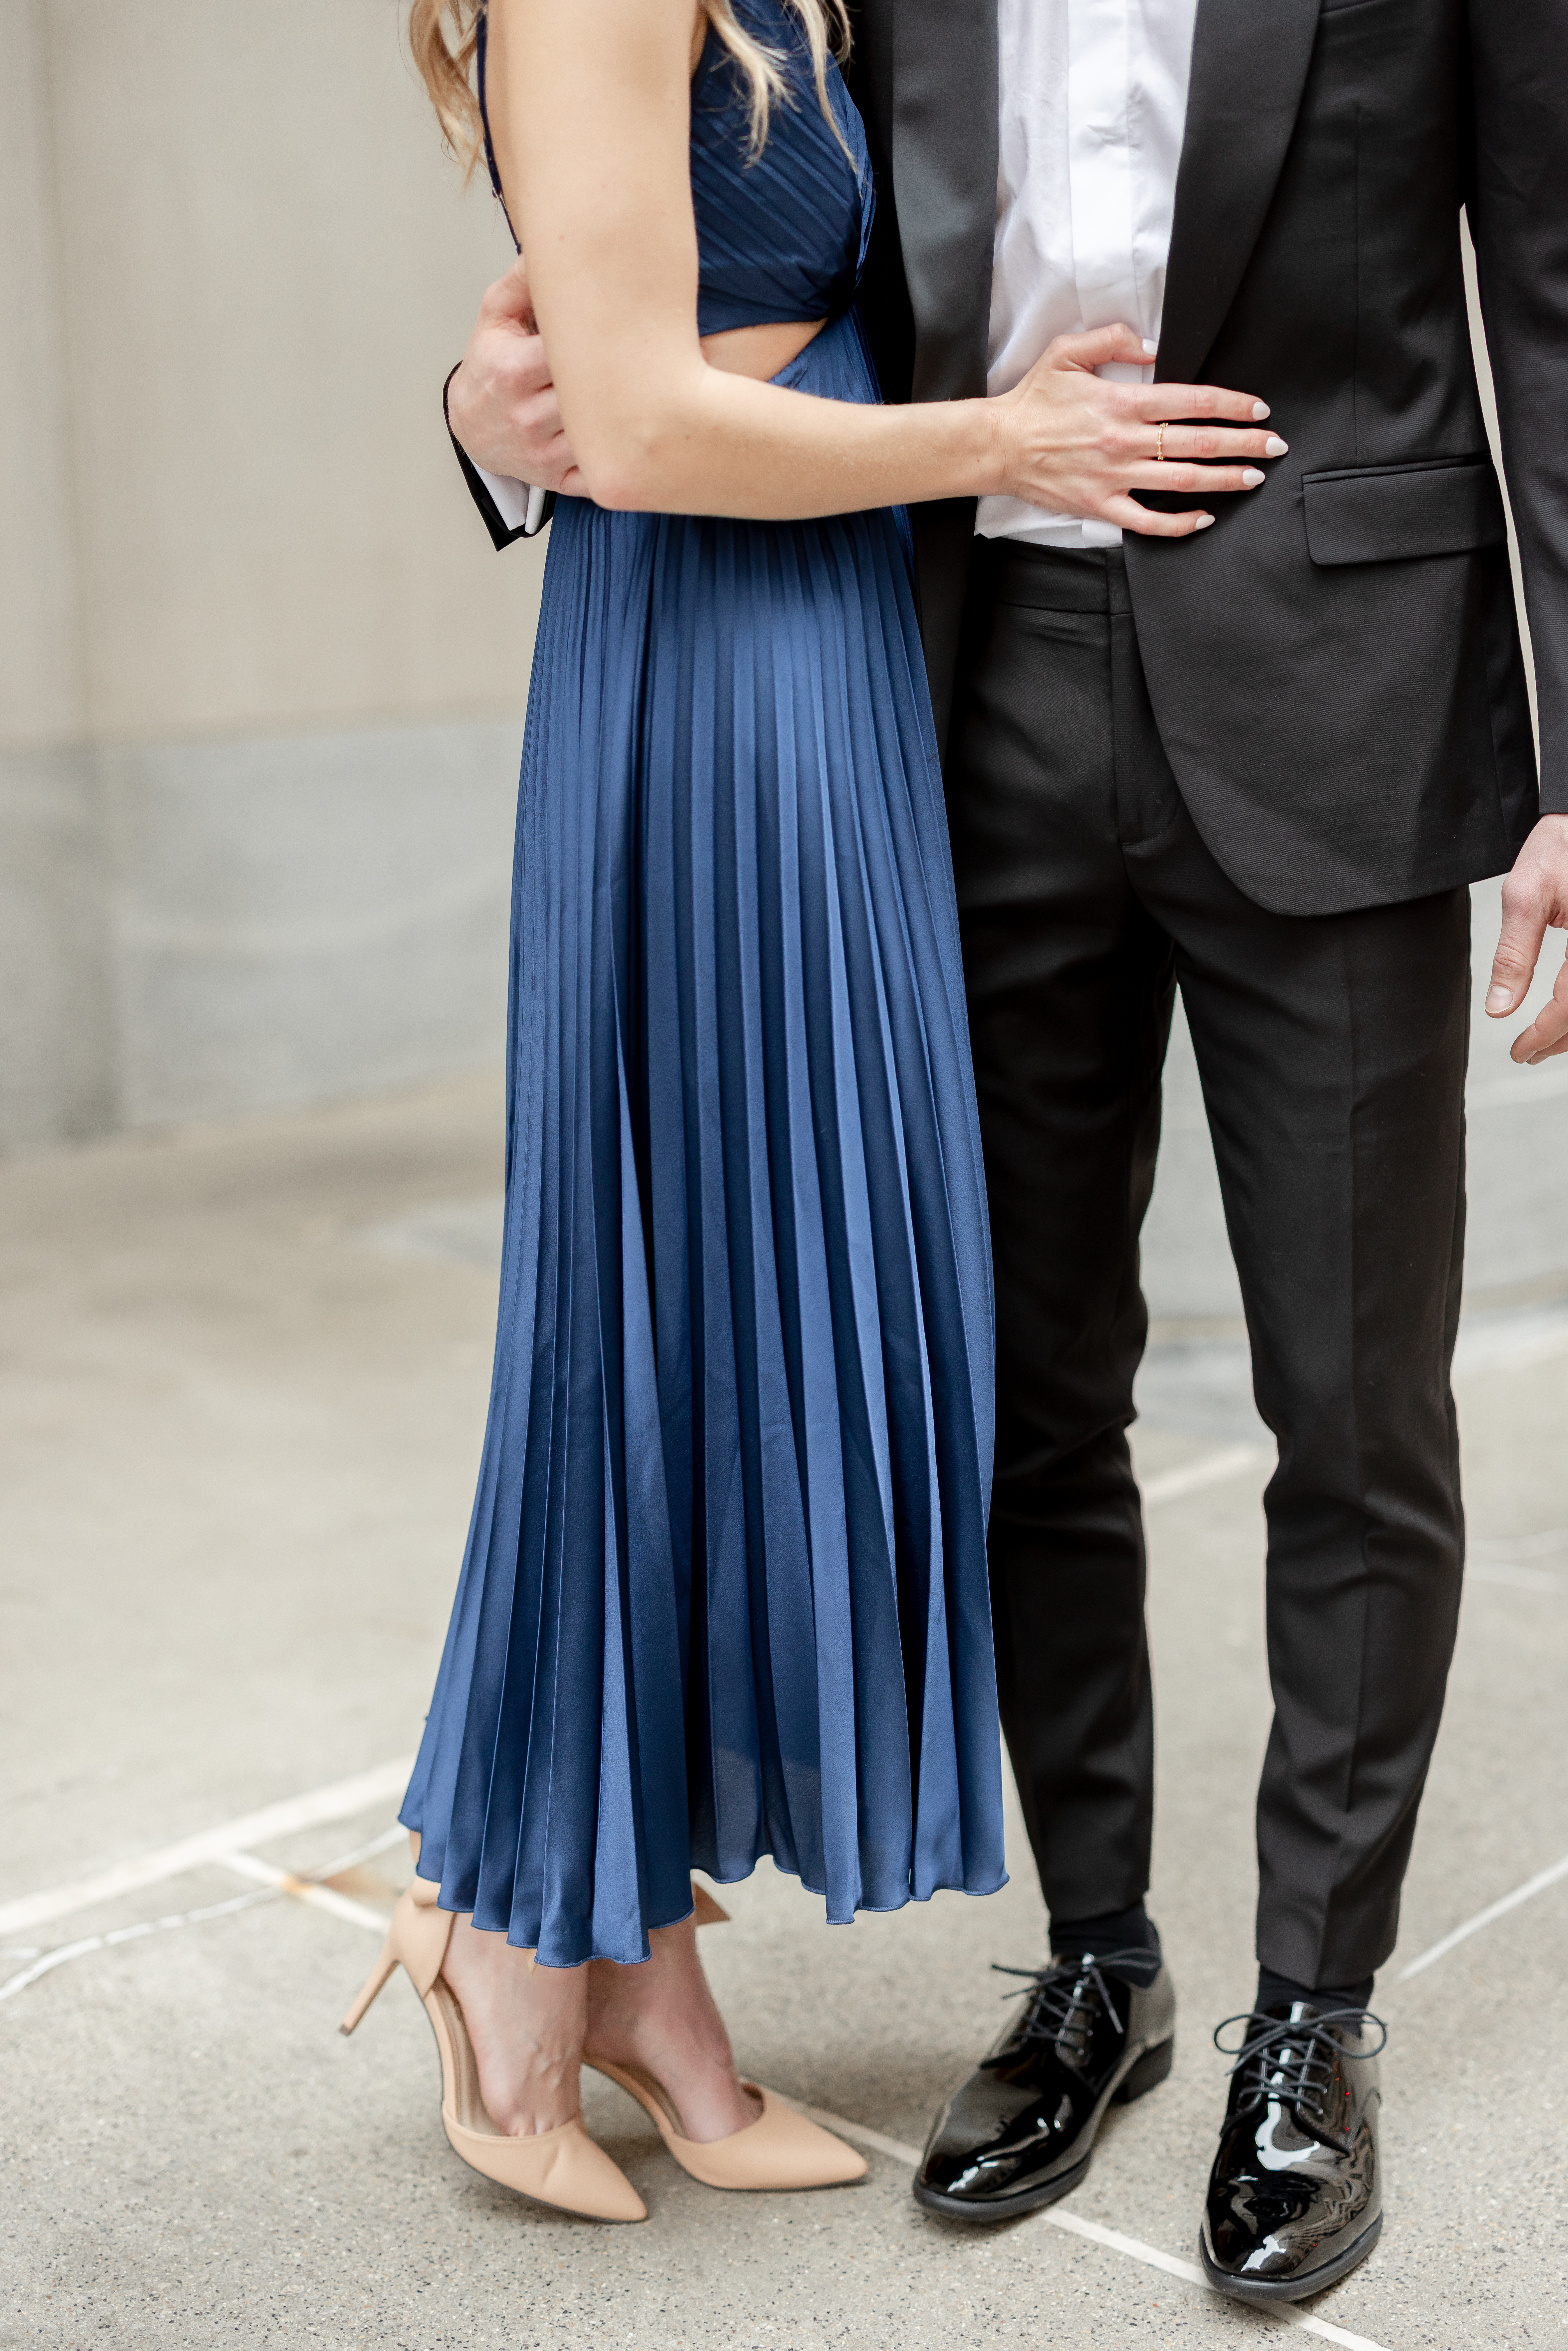 classy-engagement-session-outfit-inspiration